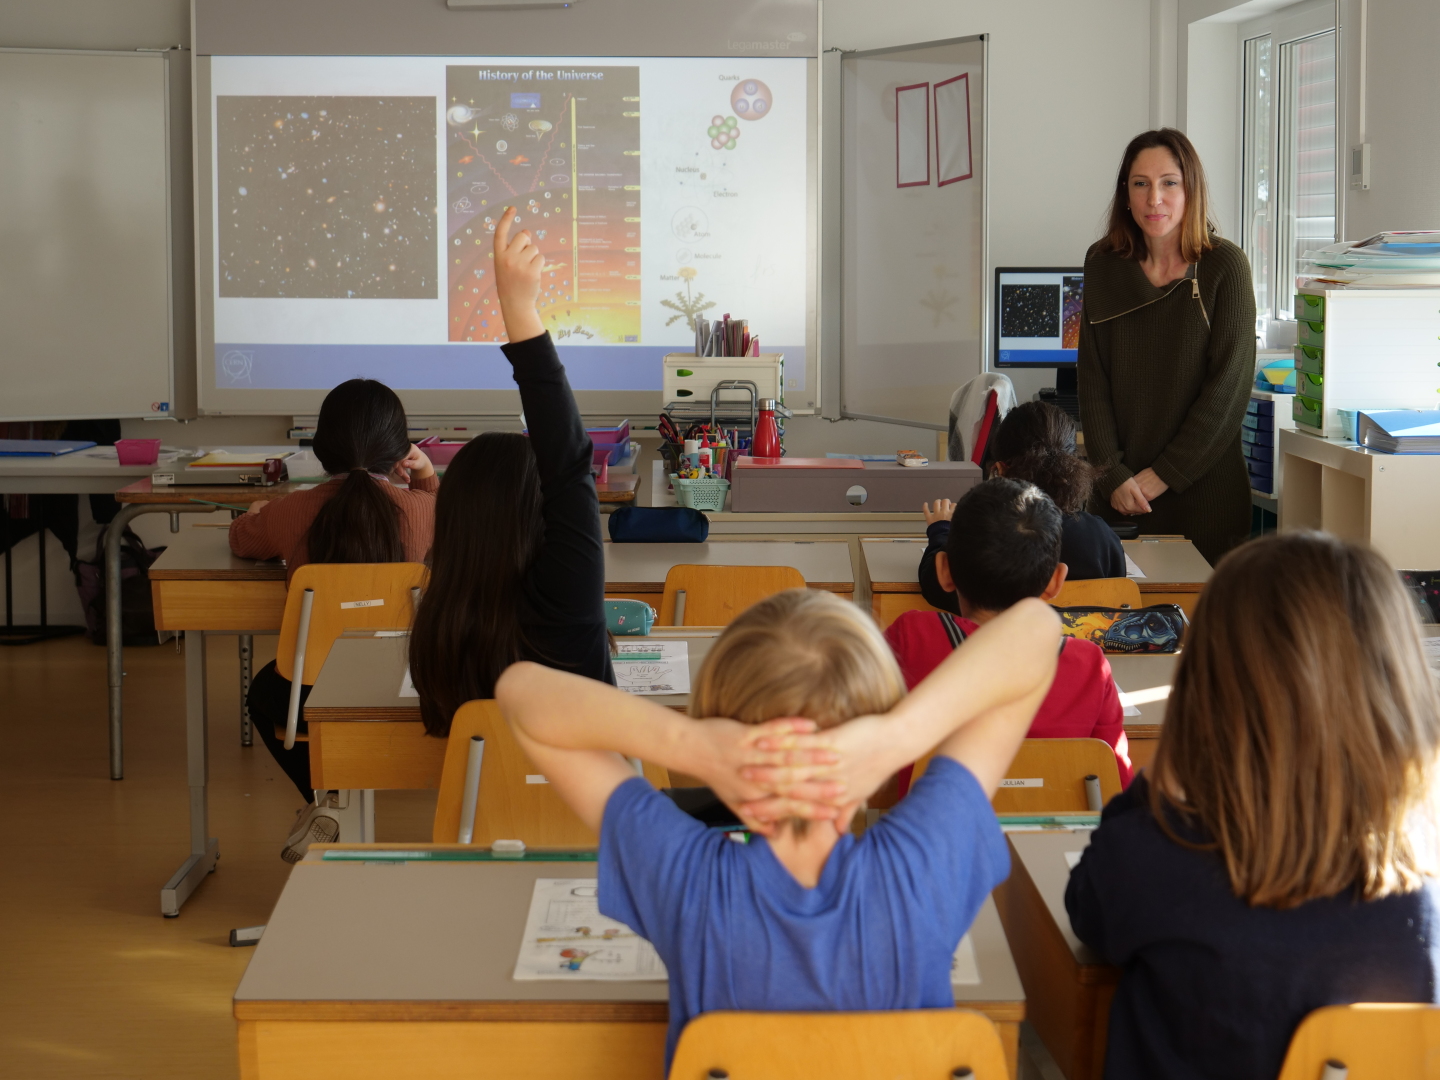 Francesca Giovacchini, a physicist working on the AMS-02 space experiment at CERN, tells pupils at the Satigny-Mairie school about her work. (Image: CERN)